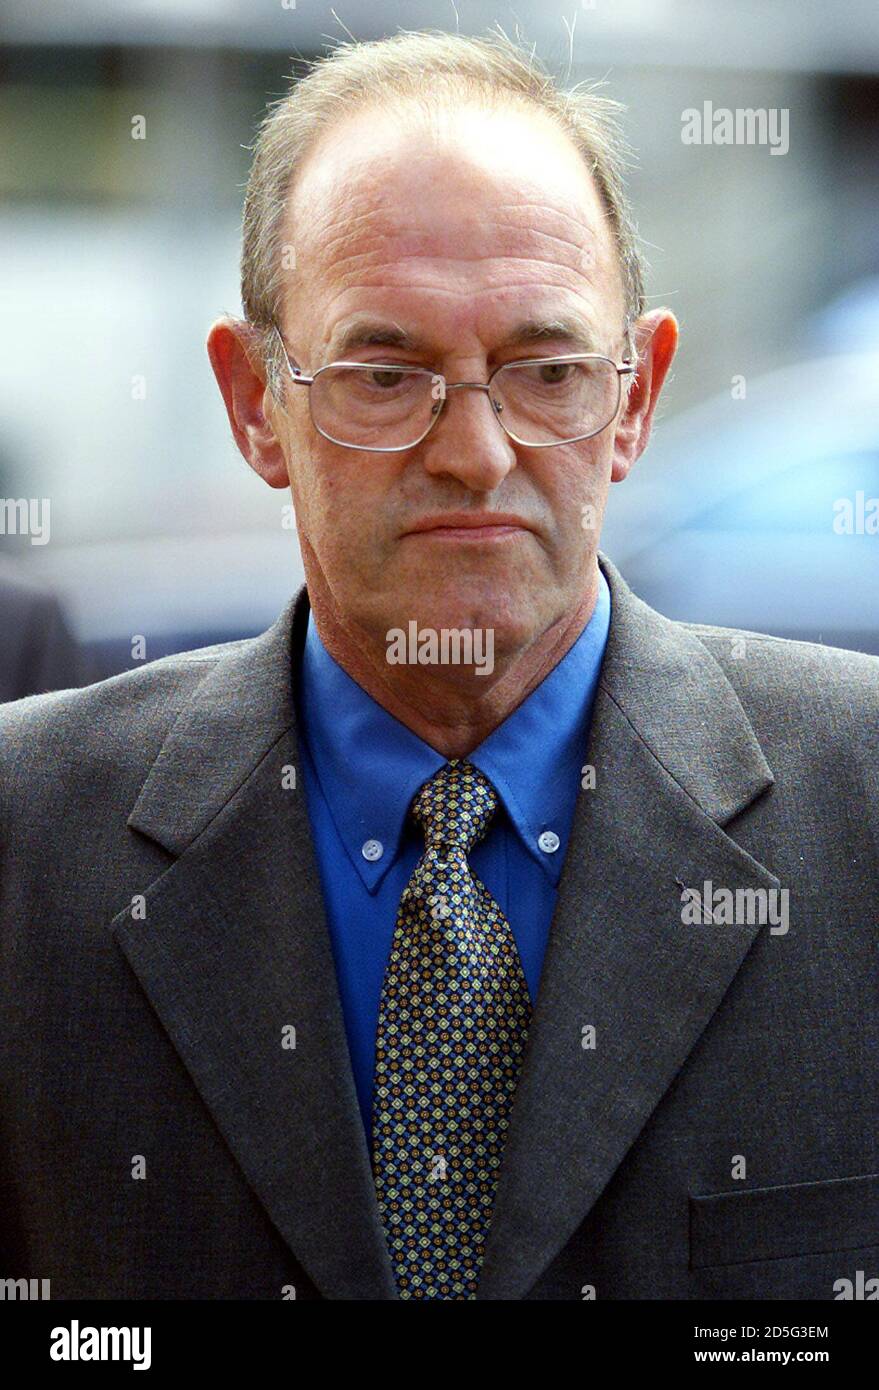 Former South Yorkshire Police Superintendent Bernard Murray arrives at Leeds Crown Court June 6. Murray and former Chief Superintendant David Duckinfield are charged with manslaughter and wilful neglect of duty in the first criminal proceedings to follow the Hillsborough tragedy in which 96 Liverpool soccer fans were crushed to death at the 1989 FA Cup Semi final.  DC Stock Photo